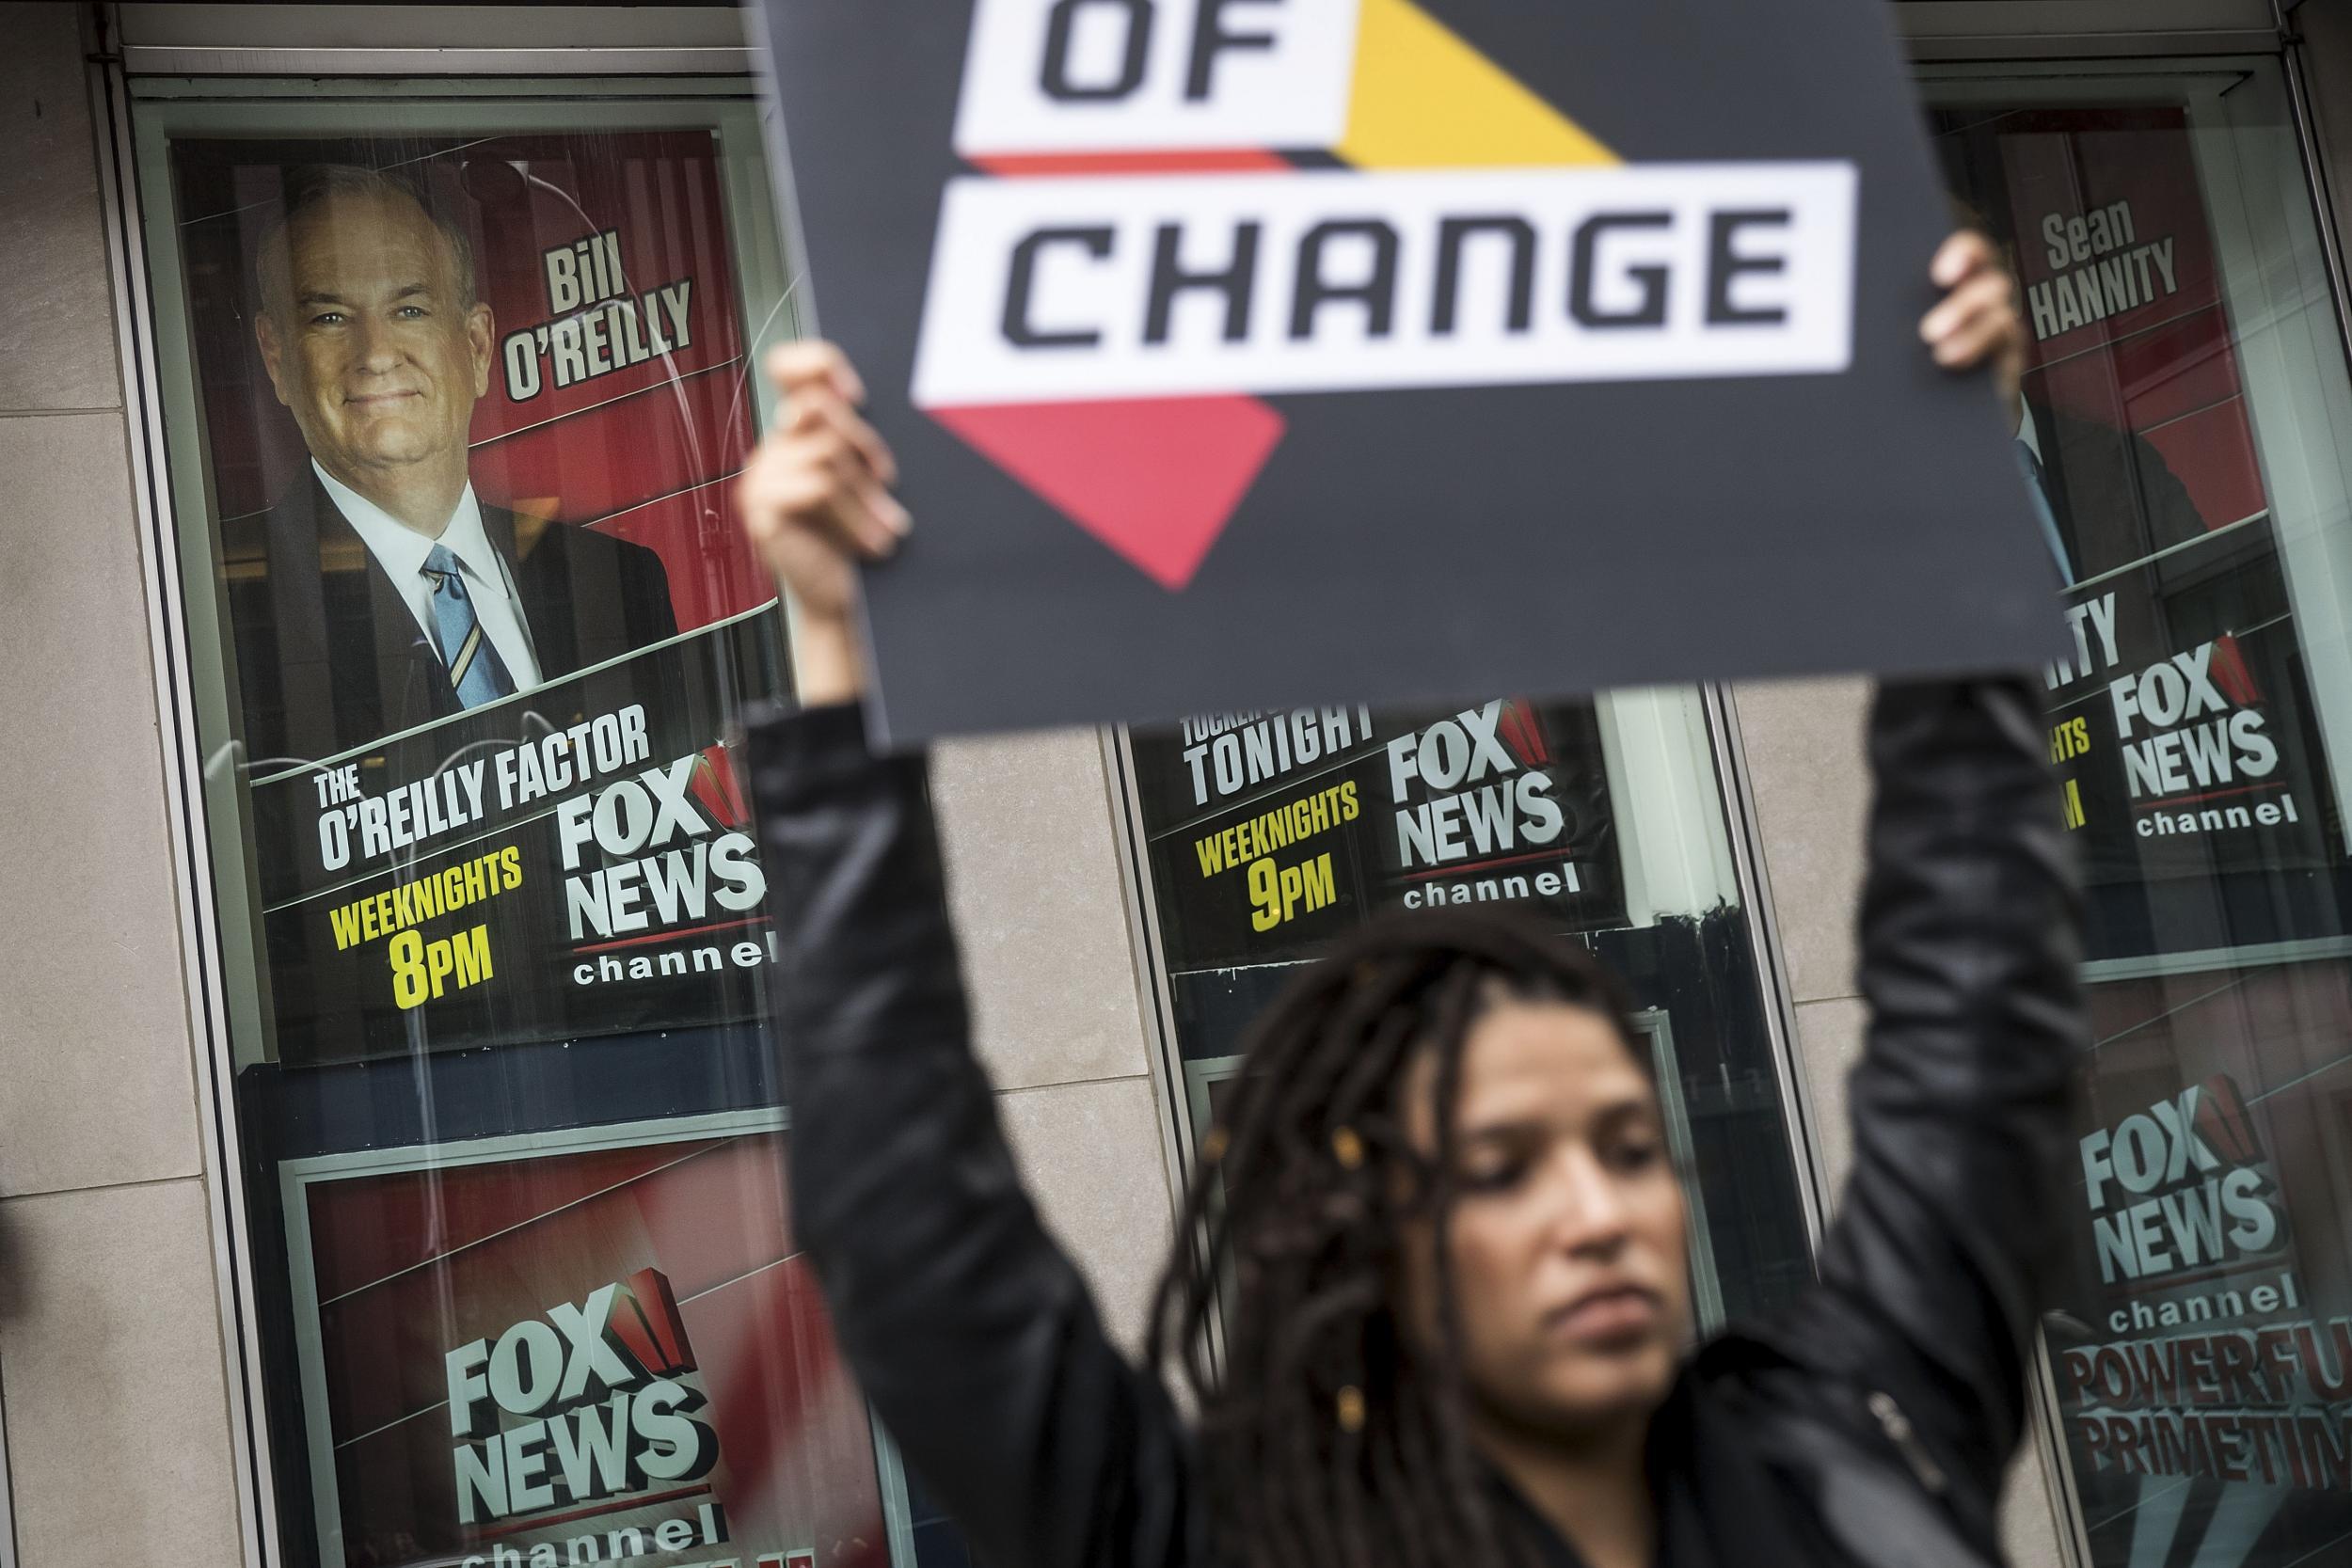 Protestors rally outside Fox News offices in New York in the wake of sexual harassment allegations